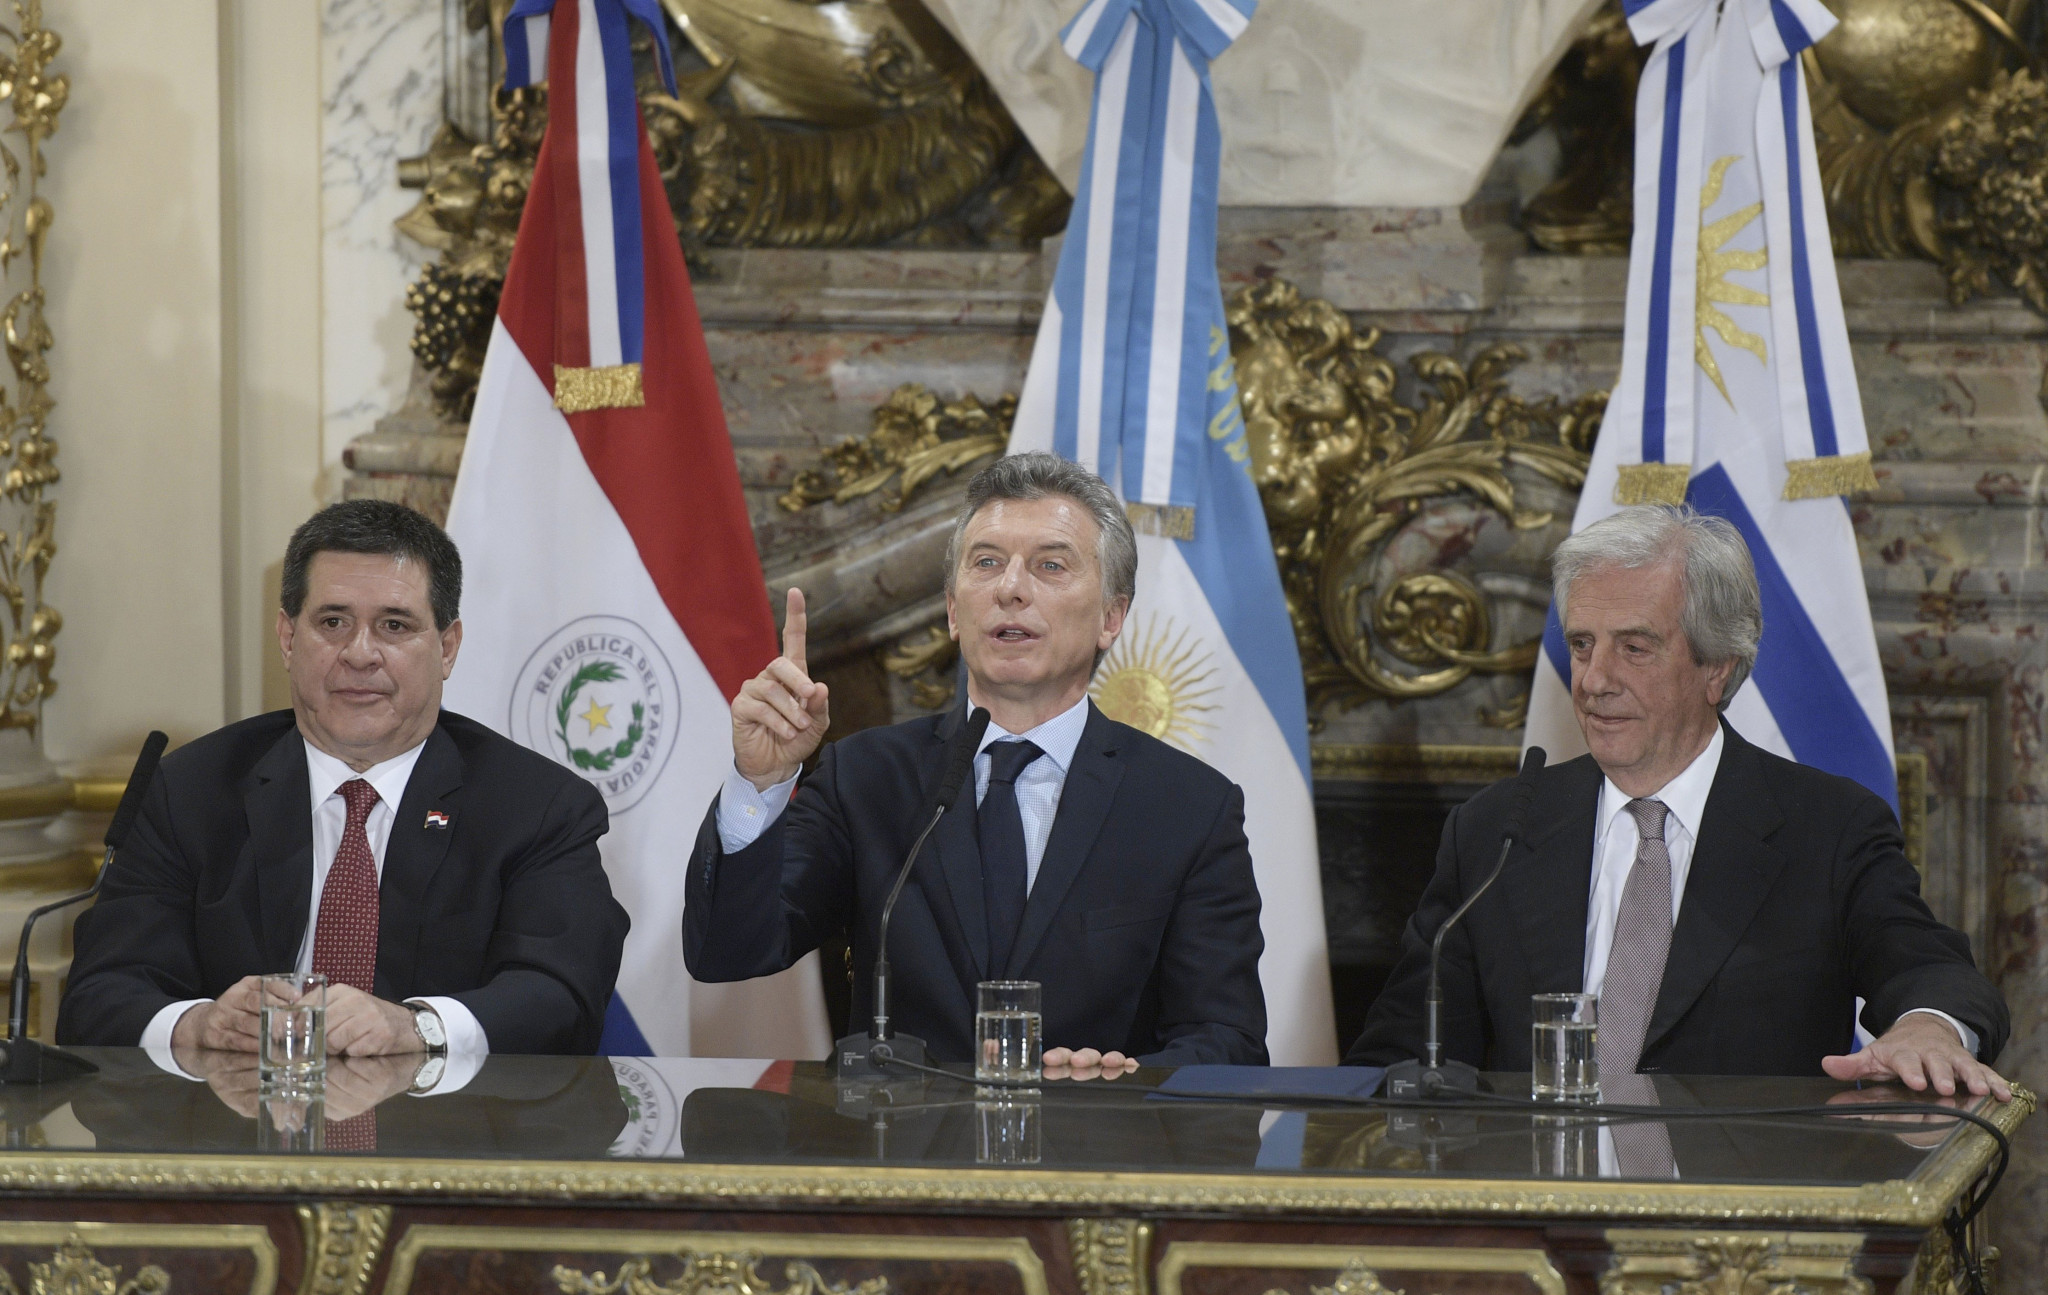 The Presidents of Paraguay, Argentina and Uruguay jointly announced the bid plan ©Getty Images